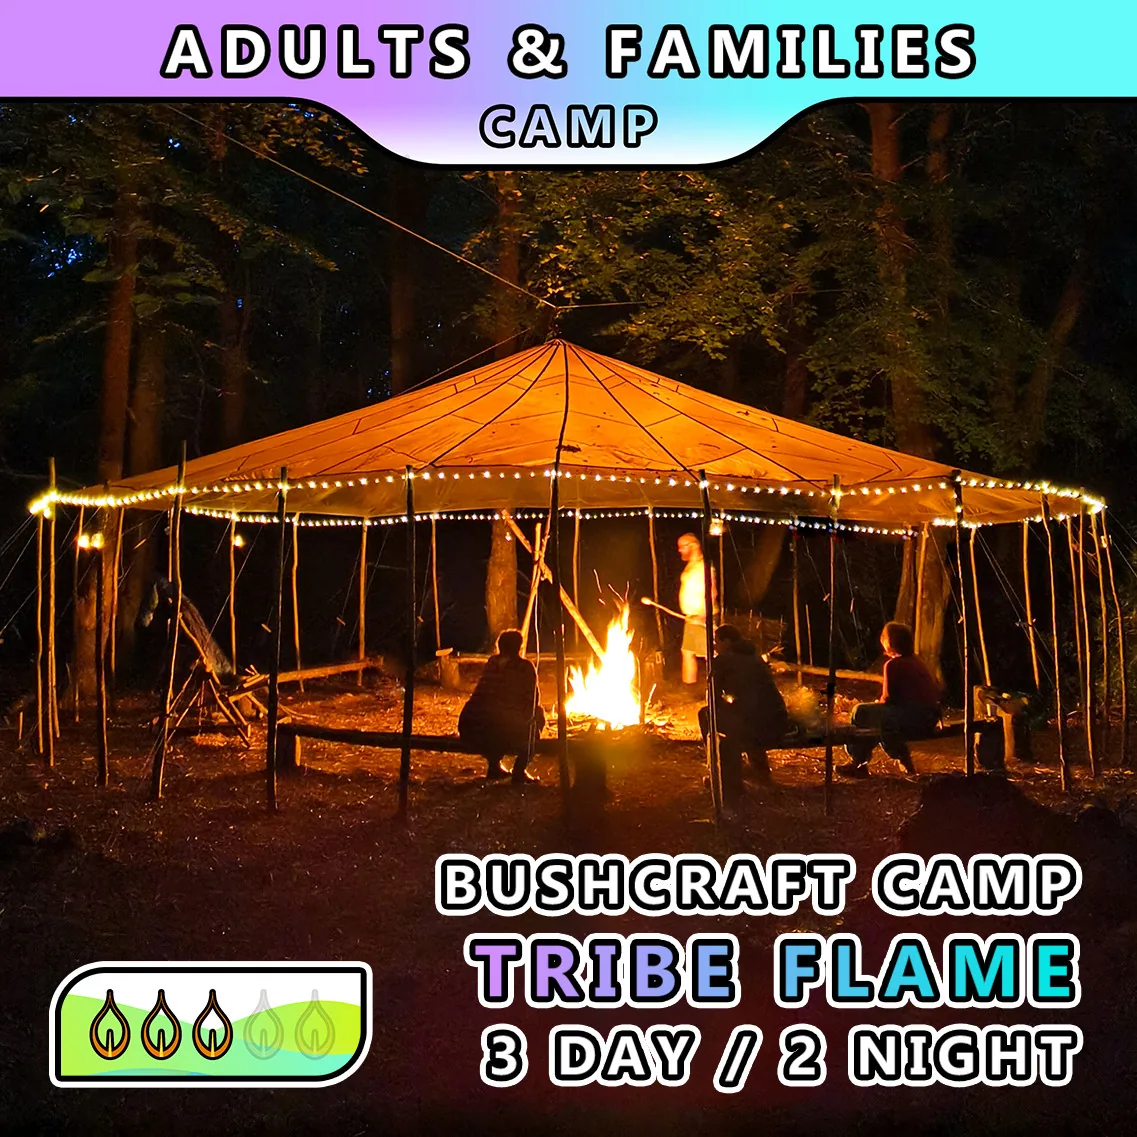 bushcraft family camp 3 days and 2 nights at TRIBE